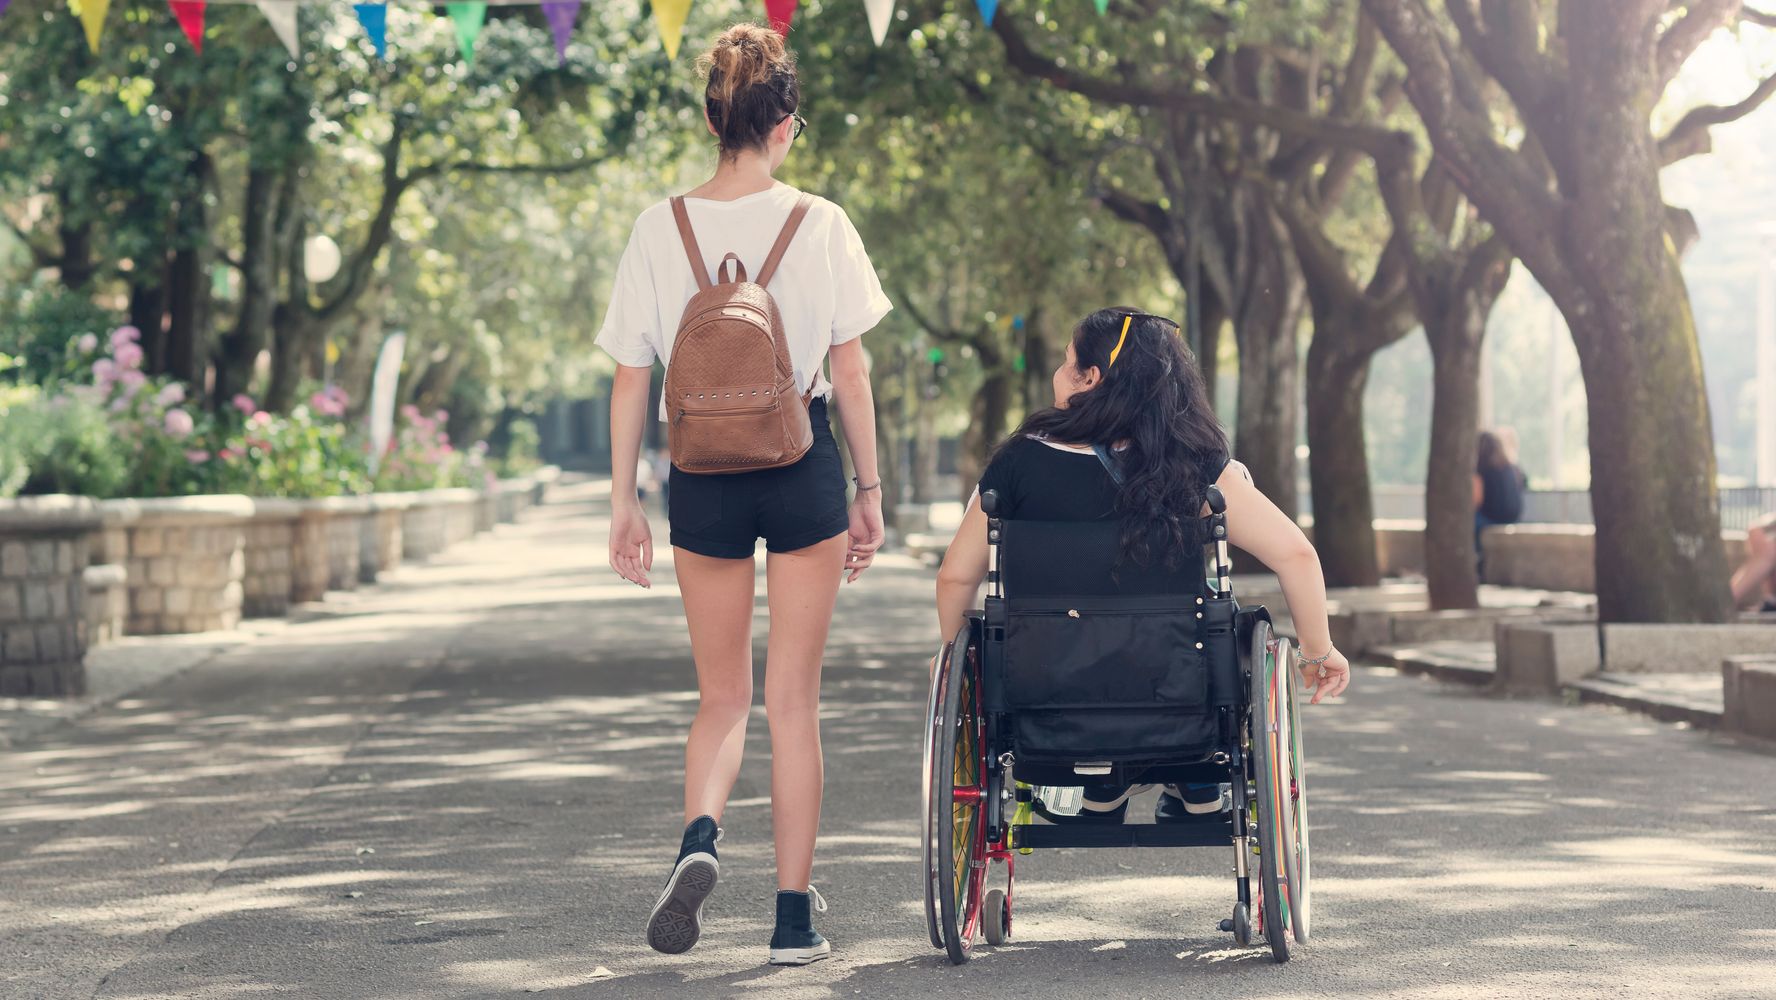 12 Things Disabled People Want Their Nondisabled Friends To Know